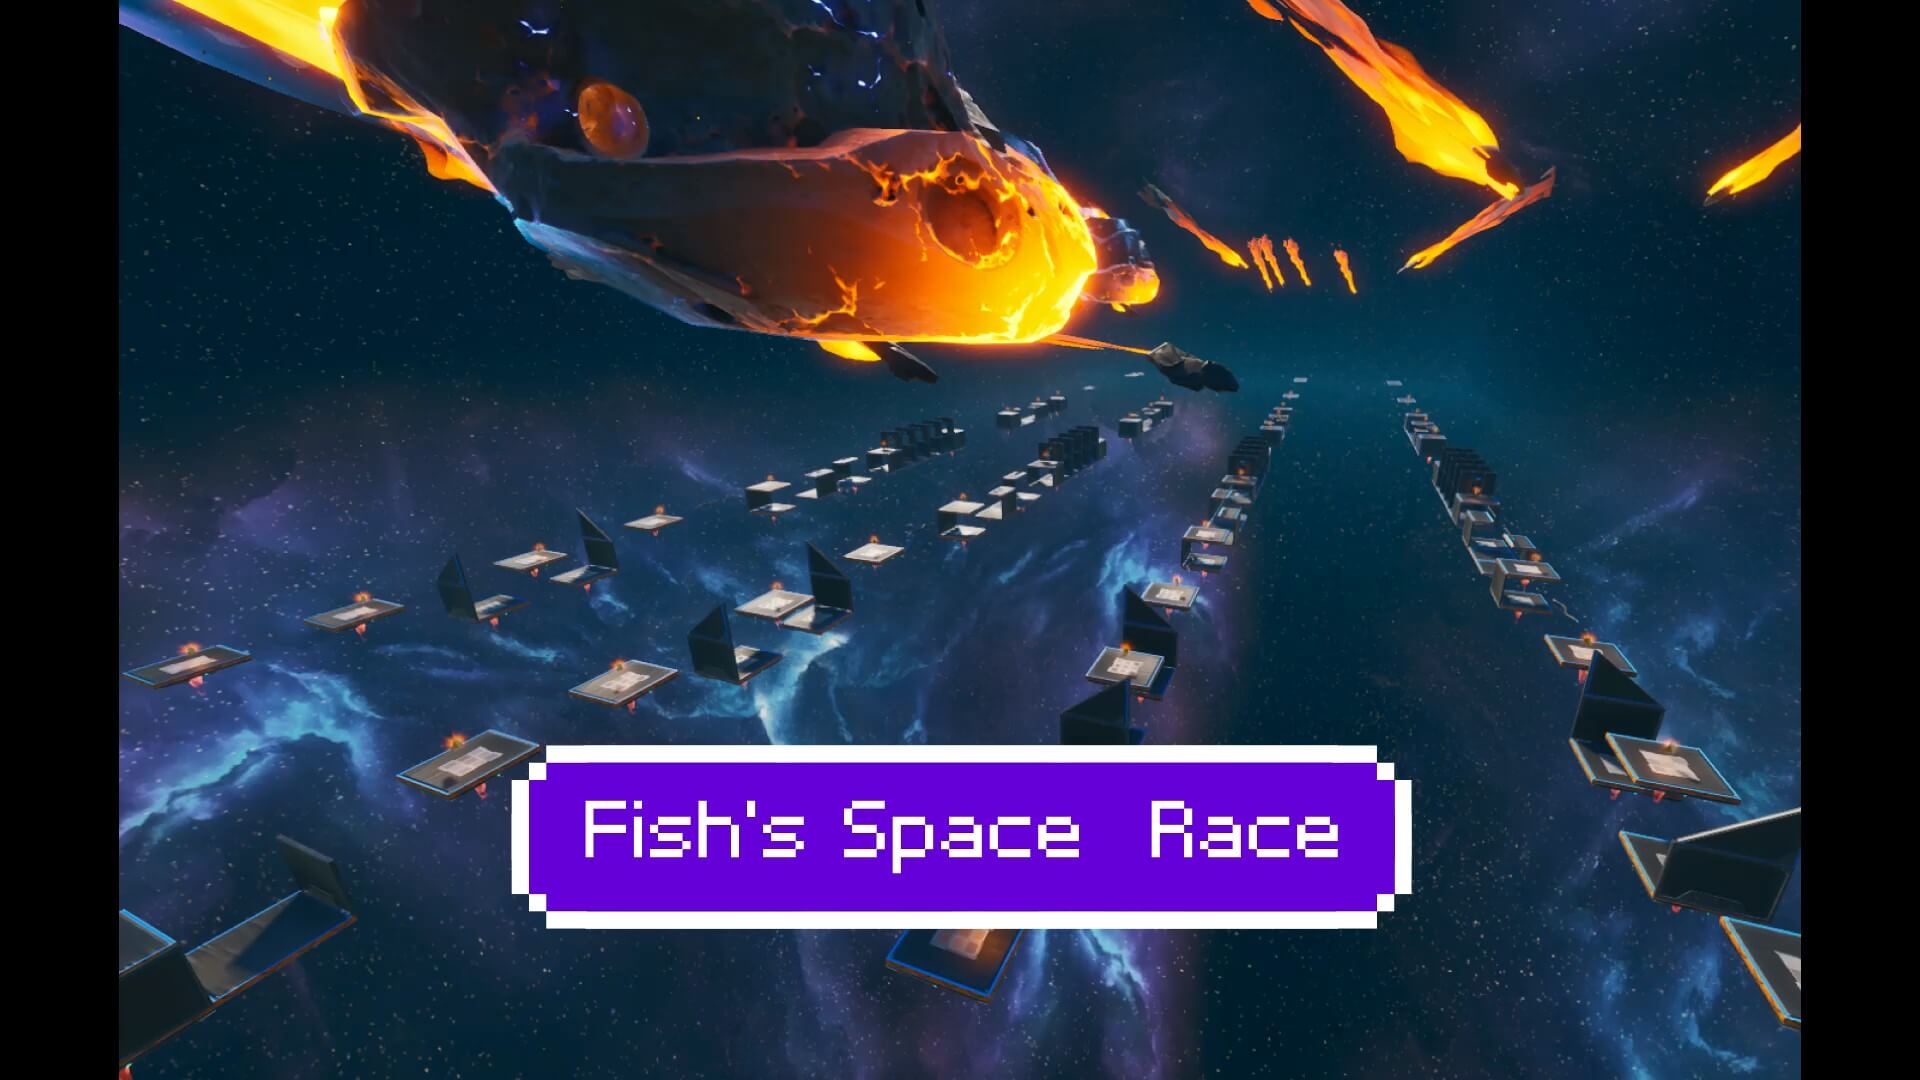 FISH'S SPACE RACE